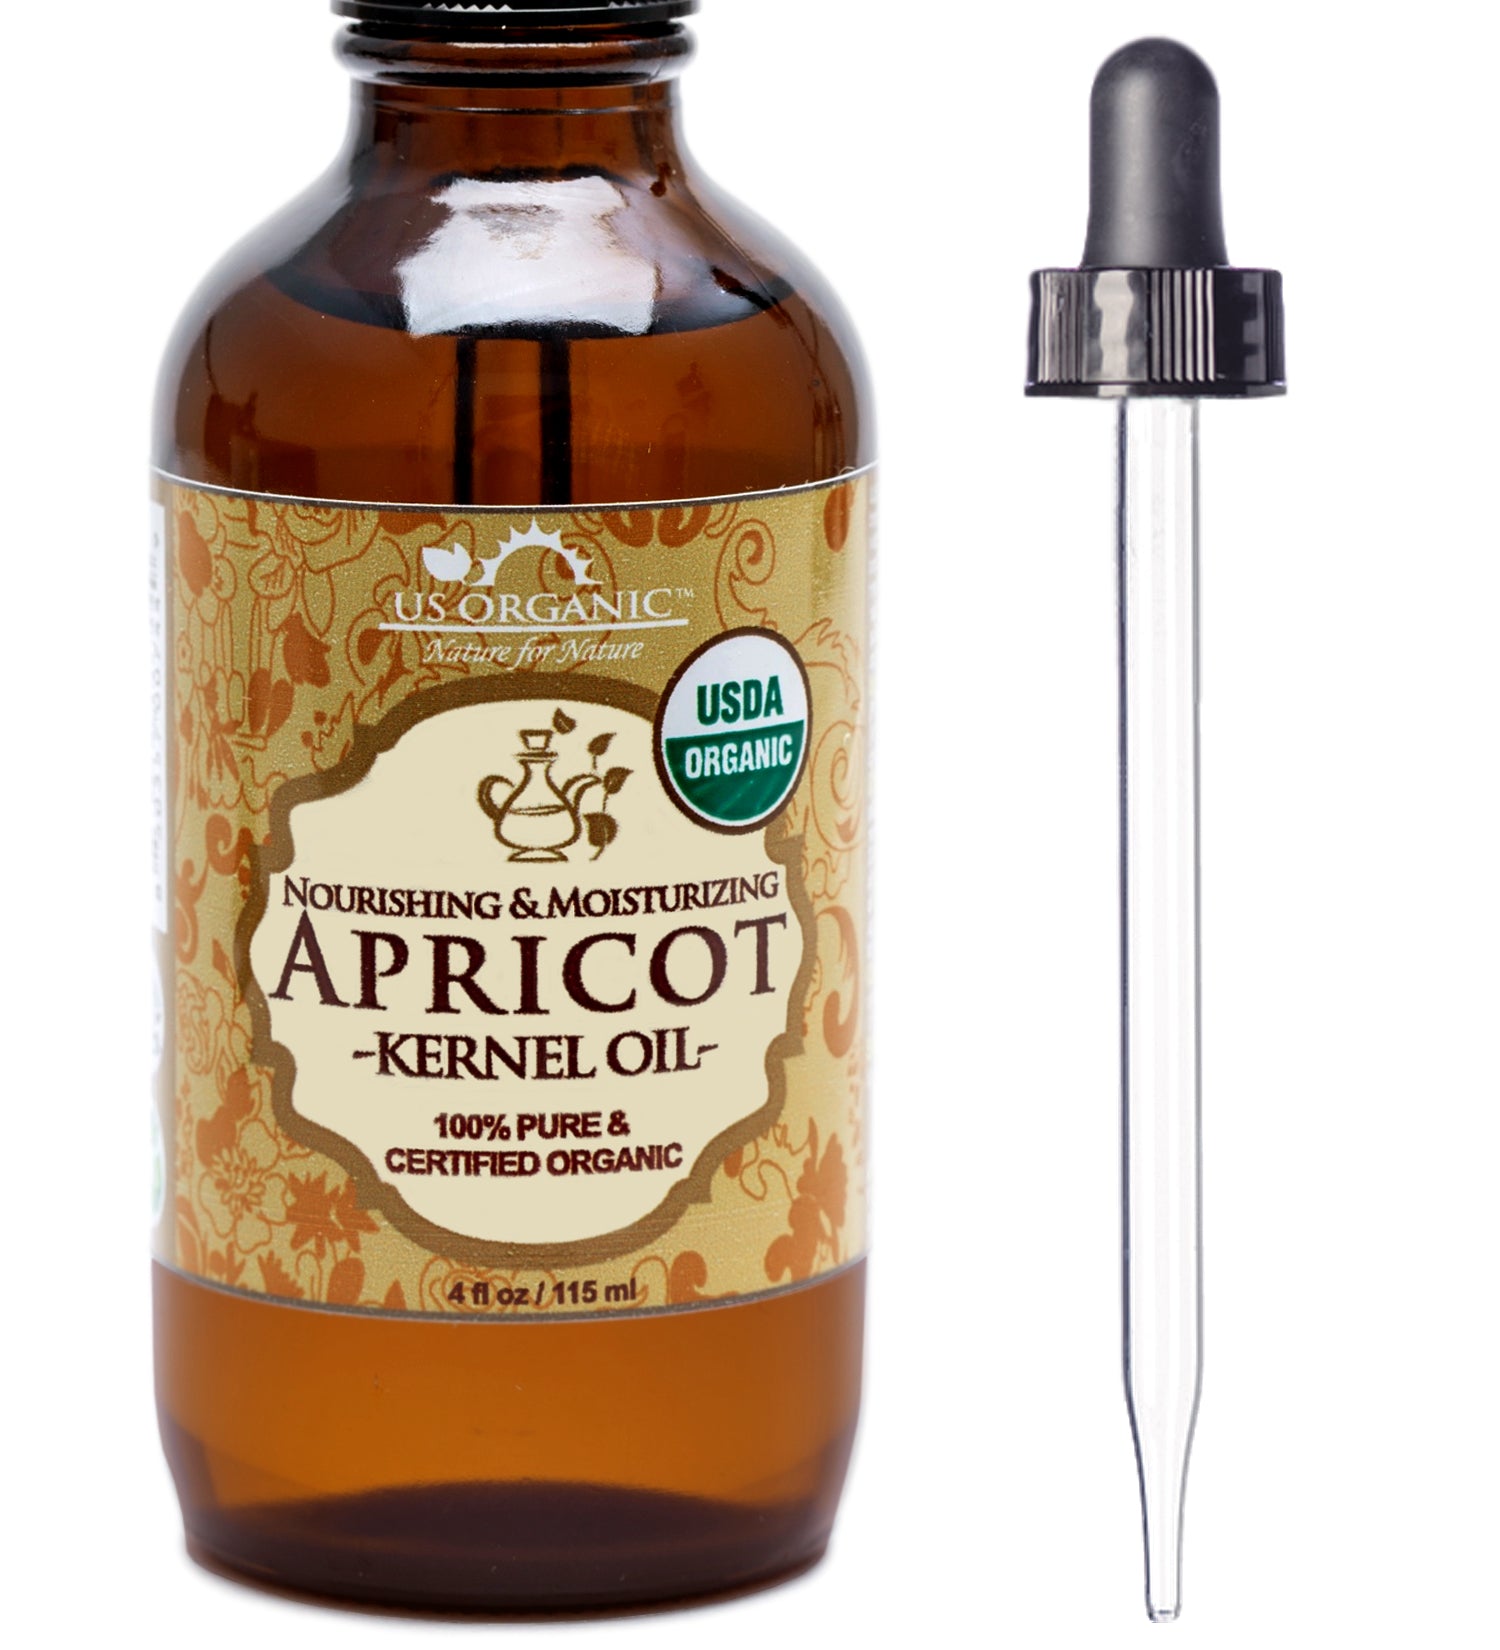 US Organic  Apricot Kernel Oil, 100% Pure Certified USDA Organic - image 1 of 5